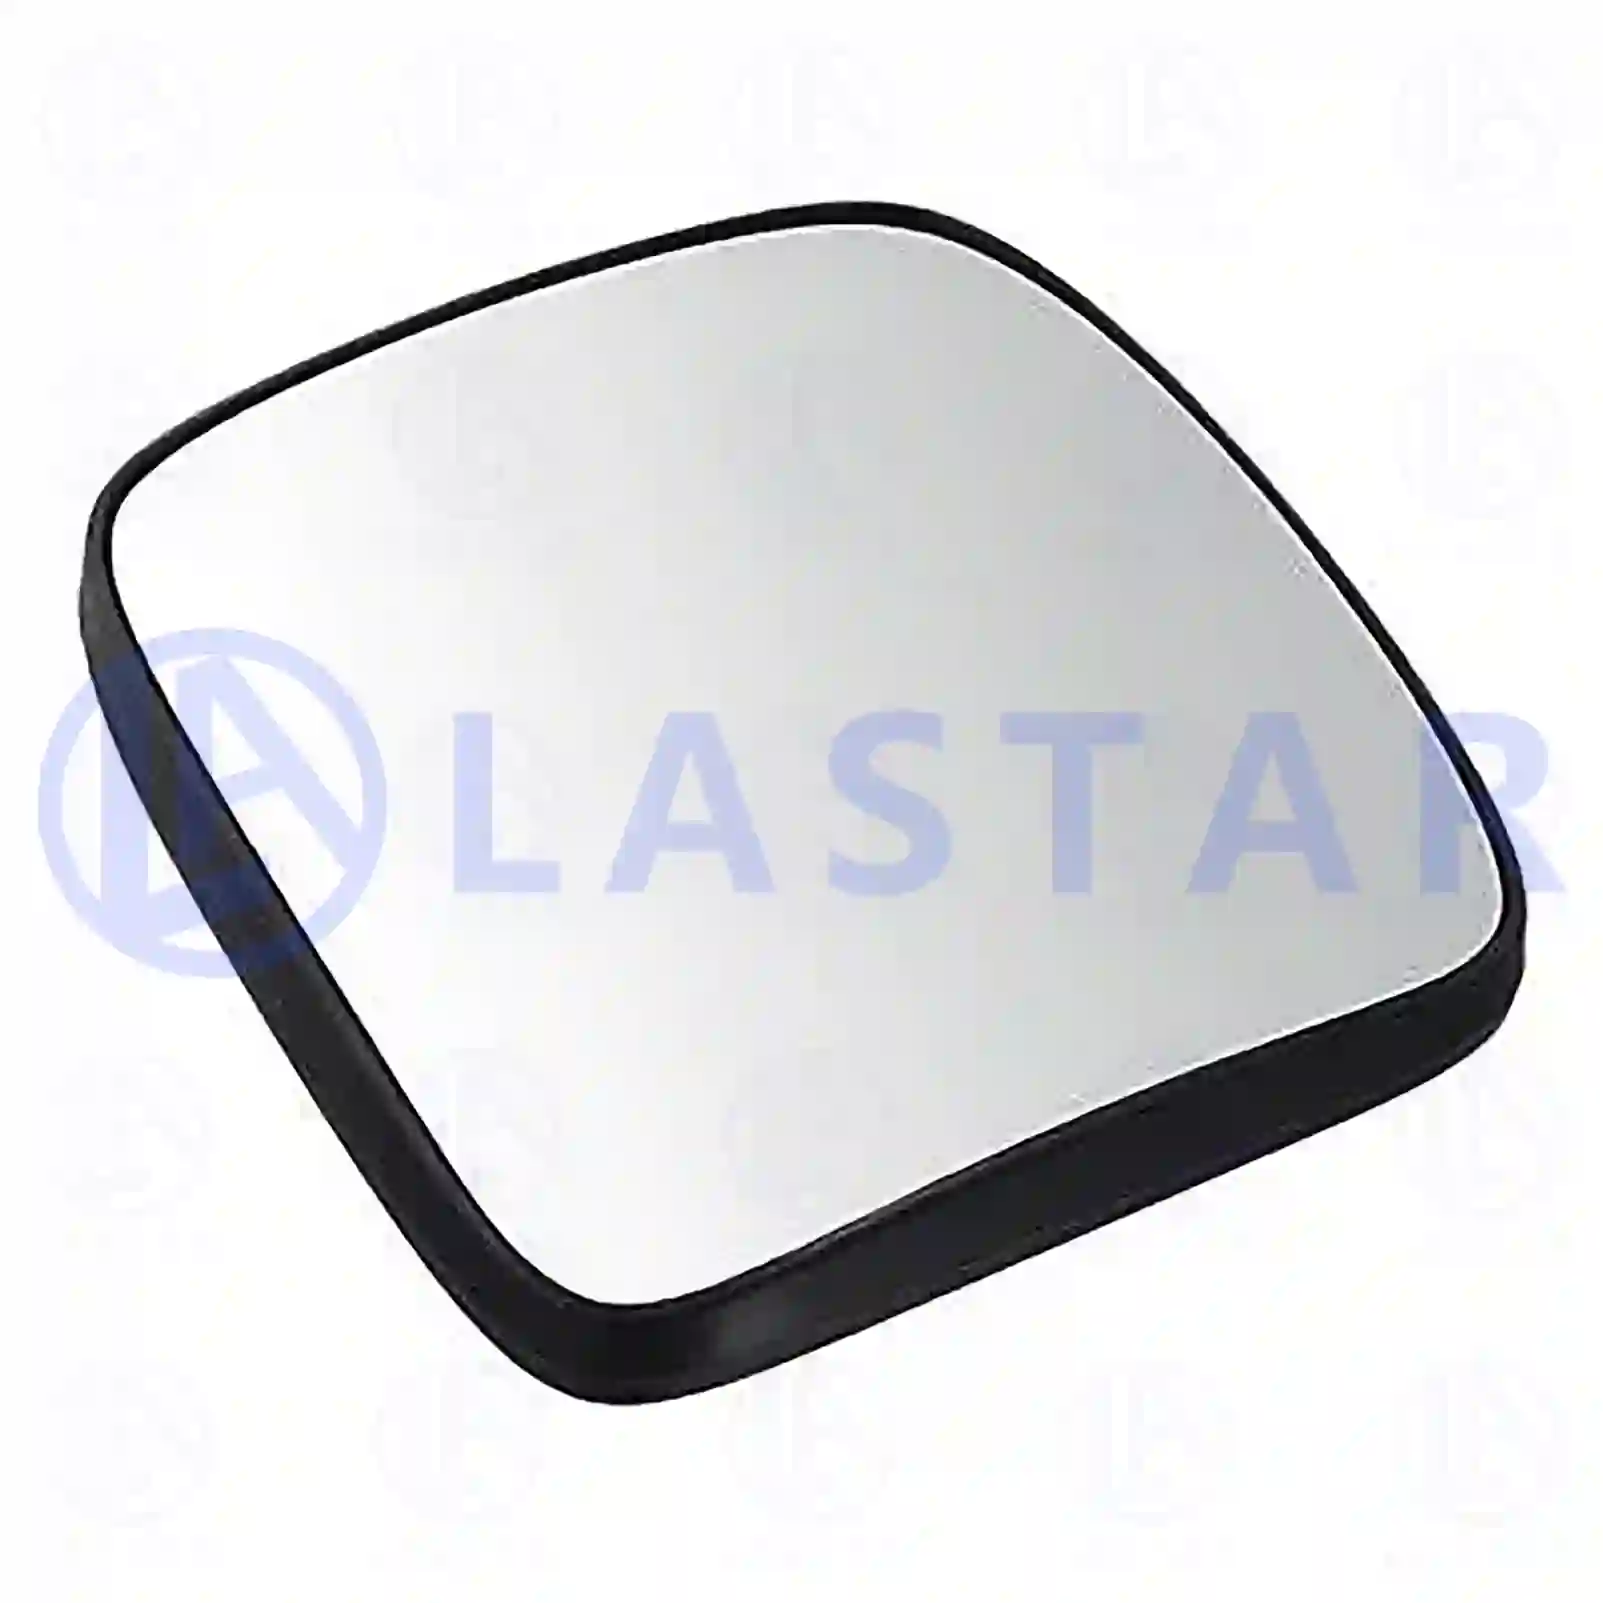 Mirror glass, wide view mirror, heated, 77718564, 81637336057, 81637336059, 81837336059 ||  77718564 Lastar Spare Part | Truck Spare Parts, Auotomotive Spare Parts Mirror glass, wide view mirror, heated, 77718564, 81637336057, 81637336059, 81837336059 ||  77718564 Lastar Spare Part | Truck Spare Parts, Auotomotive Spare Parts